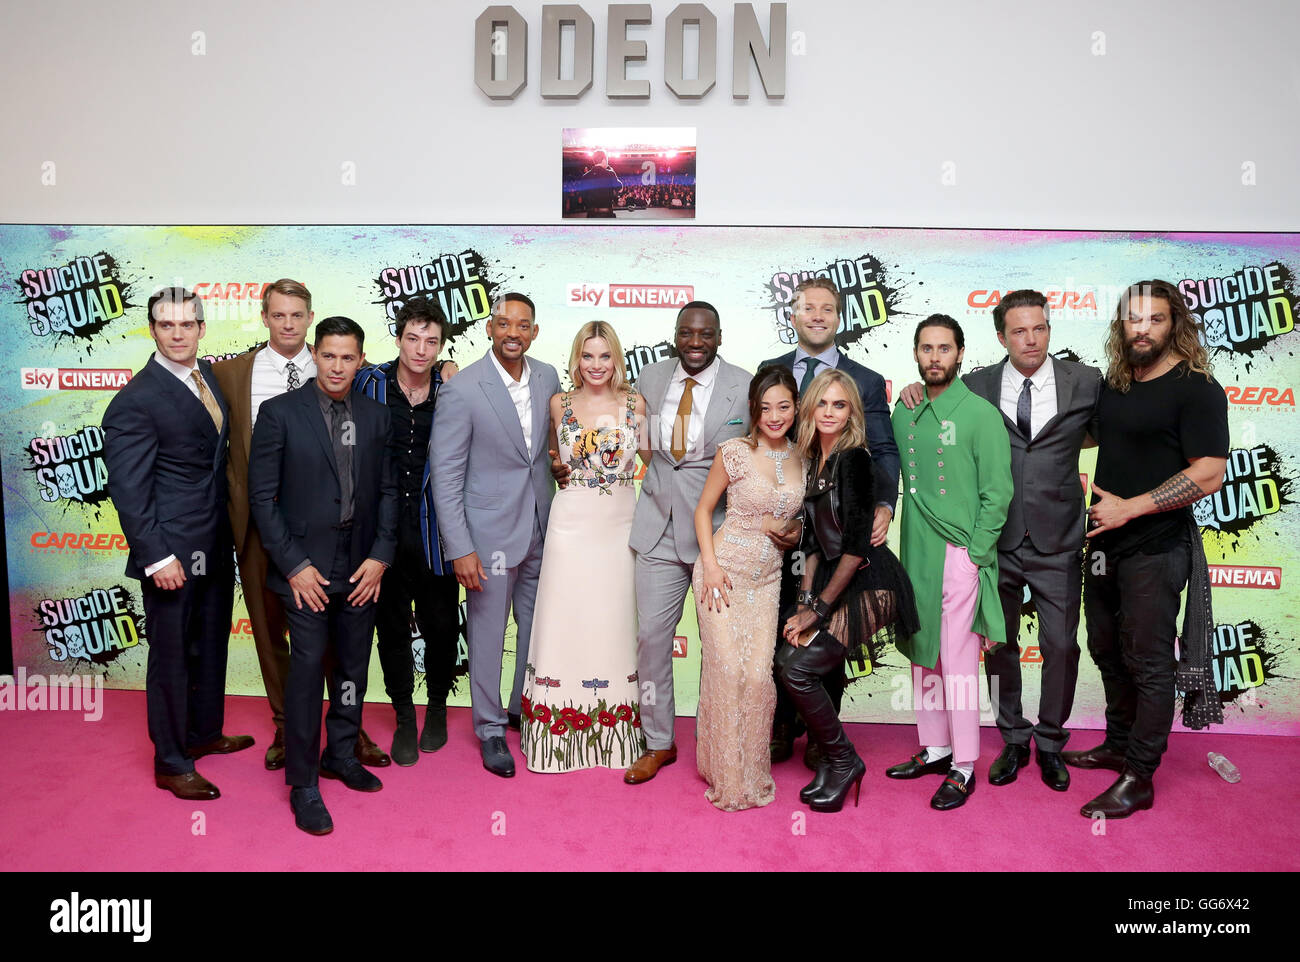 (left to right) Henry Cavill, Joel Kinnaman, Jay Hernandez, Ezra Miller, Will Smith, Margot Robbie, Adewale Akinnuoye-Agbaje, Karen Fukuhara, Jai Courtney, Cara Delevingne, Jared Leto, Ben Affleck and Jason Momoa arriving for the Suicide Squad European Premiere, at the Odeon Leicester Square, London. PRESS ASSOCIATION Photo. Picture date: Wednesday August 3, 2016. See PA story SHOWBIZ Suicide. Photo credit should read: Daniel Leal-Olivas/PA Wire Stock Photo